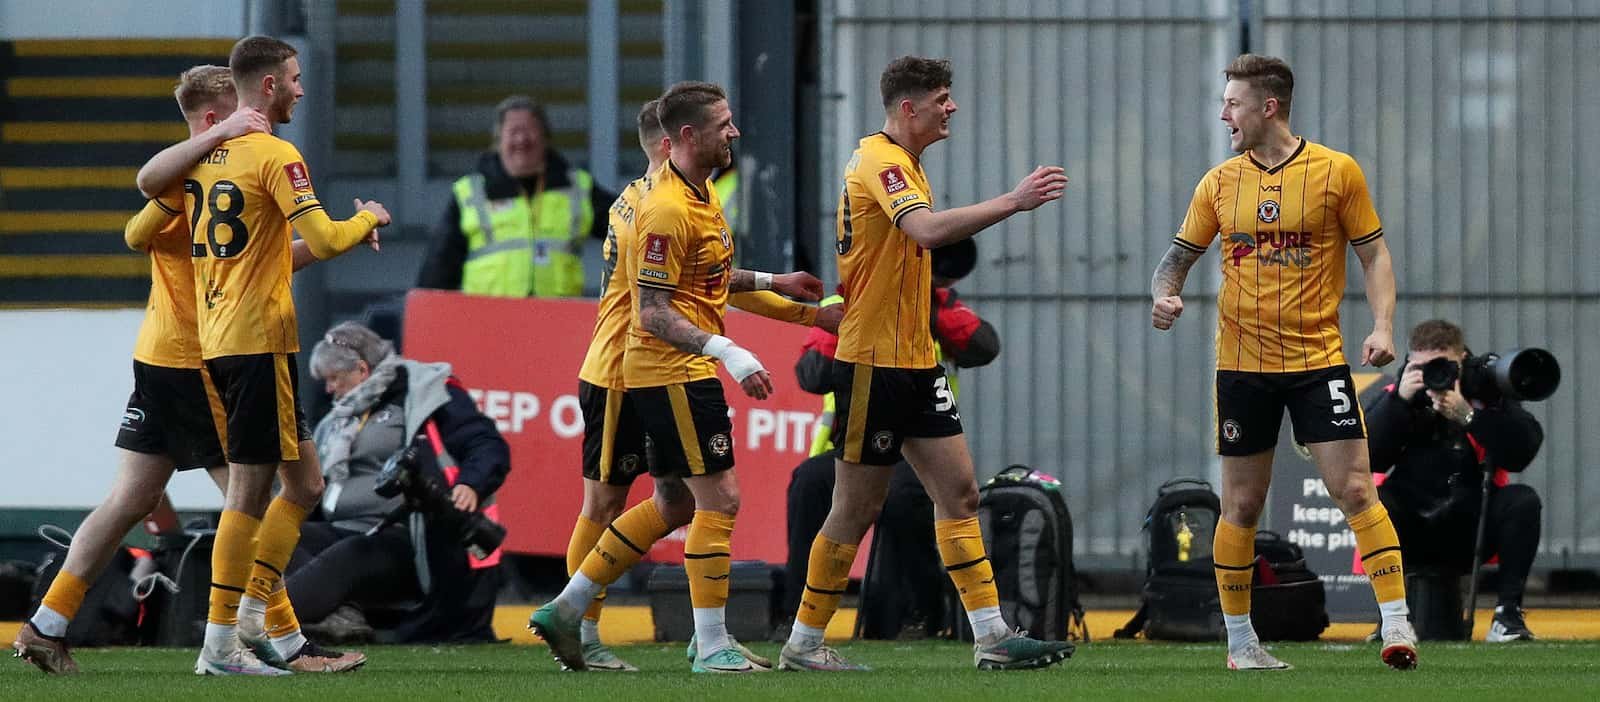 Newport County excited for the arrival of Manchester United in the FA Cup this weekend – Man United News And Transfer News